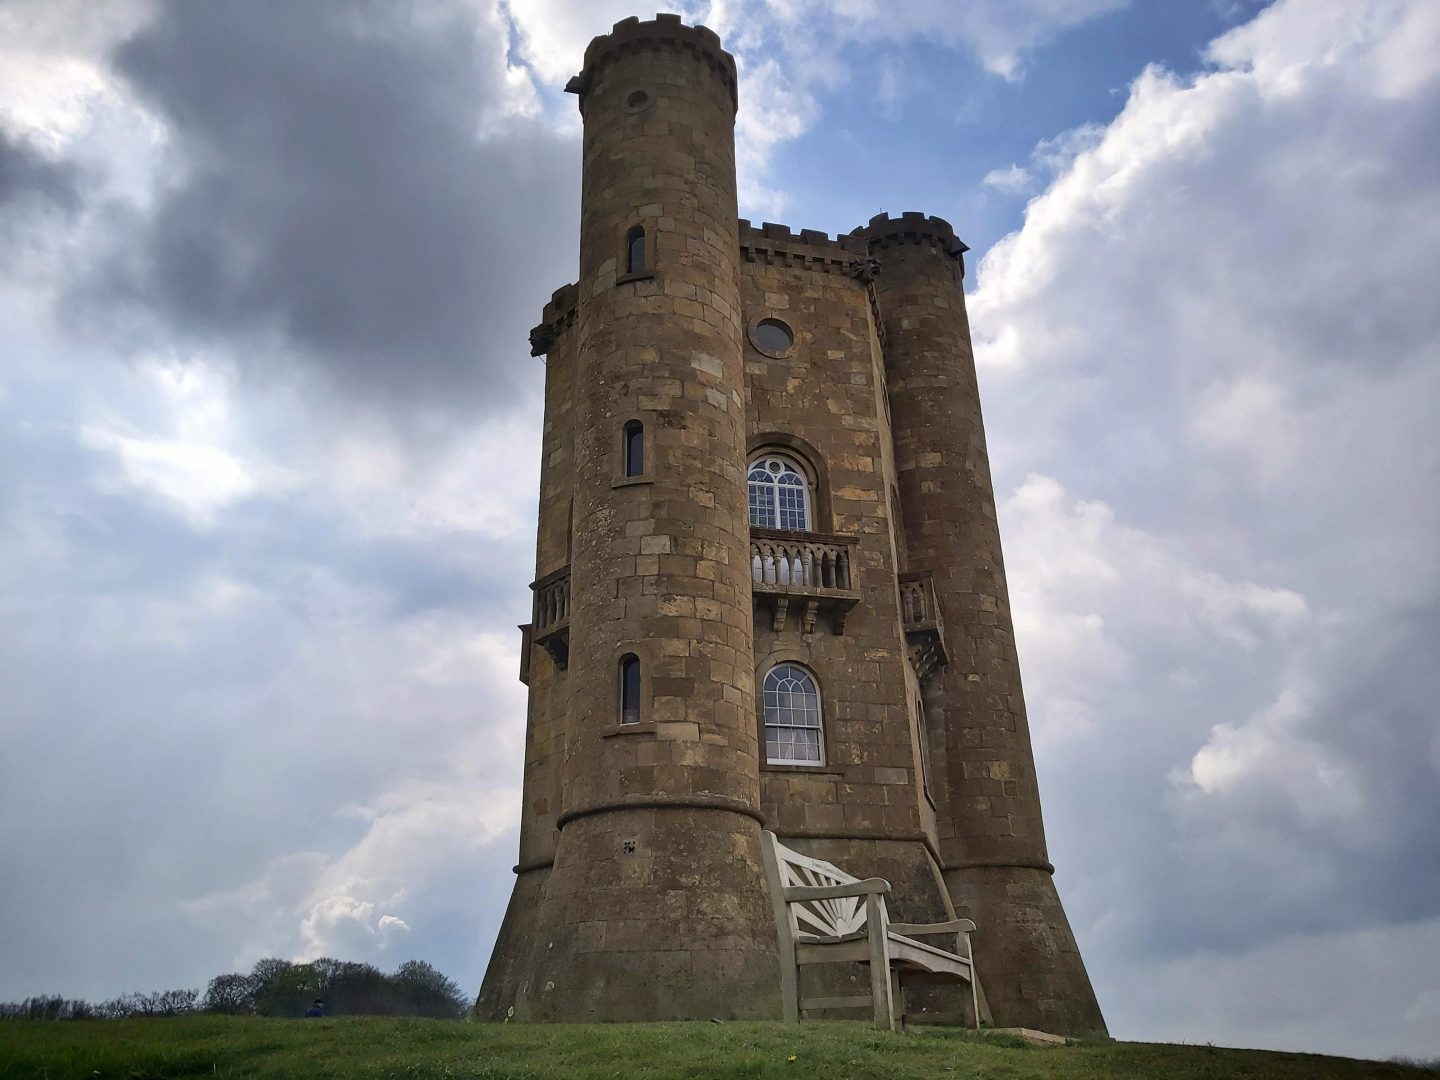 Broadway Tower in Worcestershire photographed from below with a cloudy sky and a small area of blue sky immediately above the tower